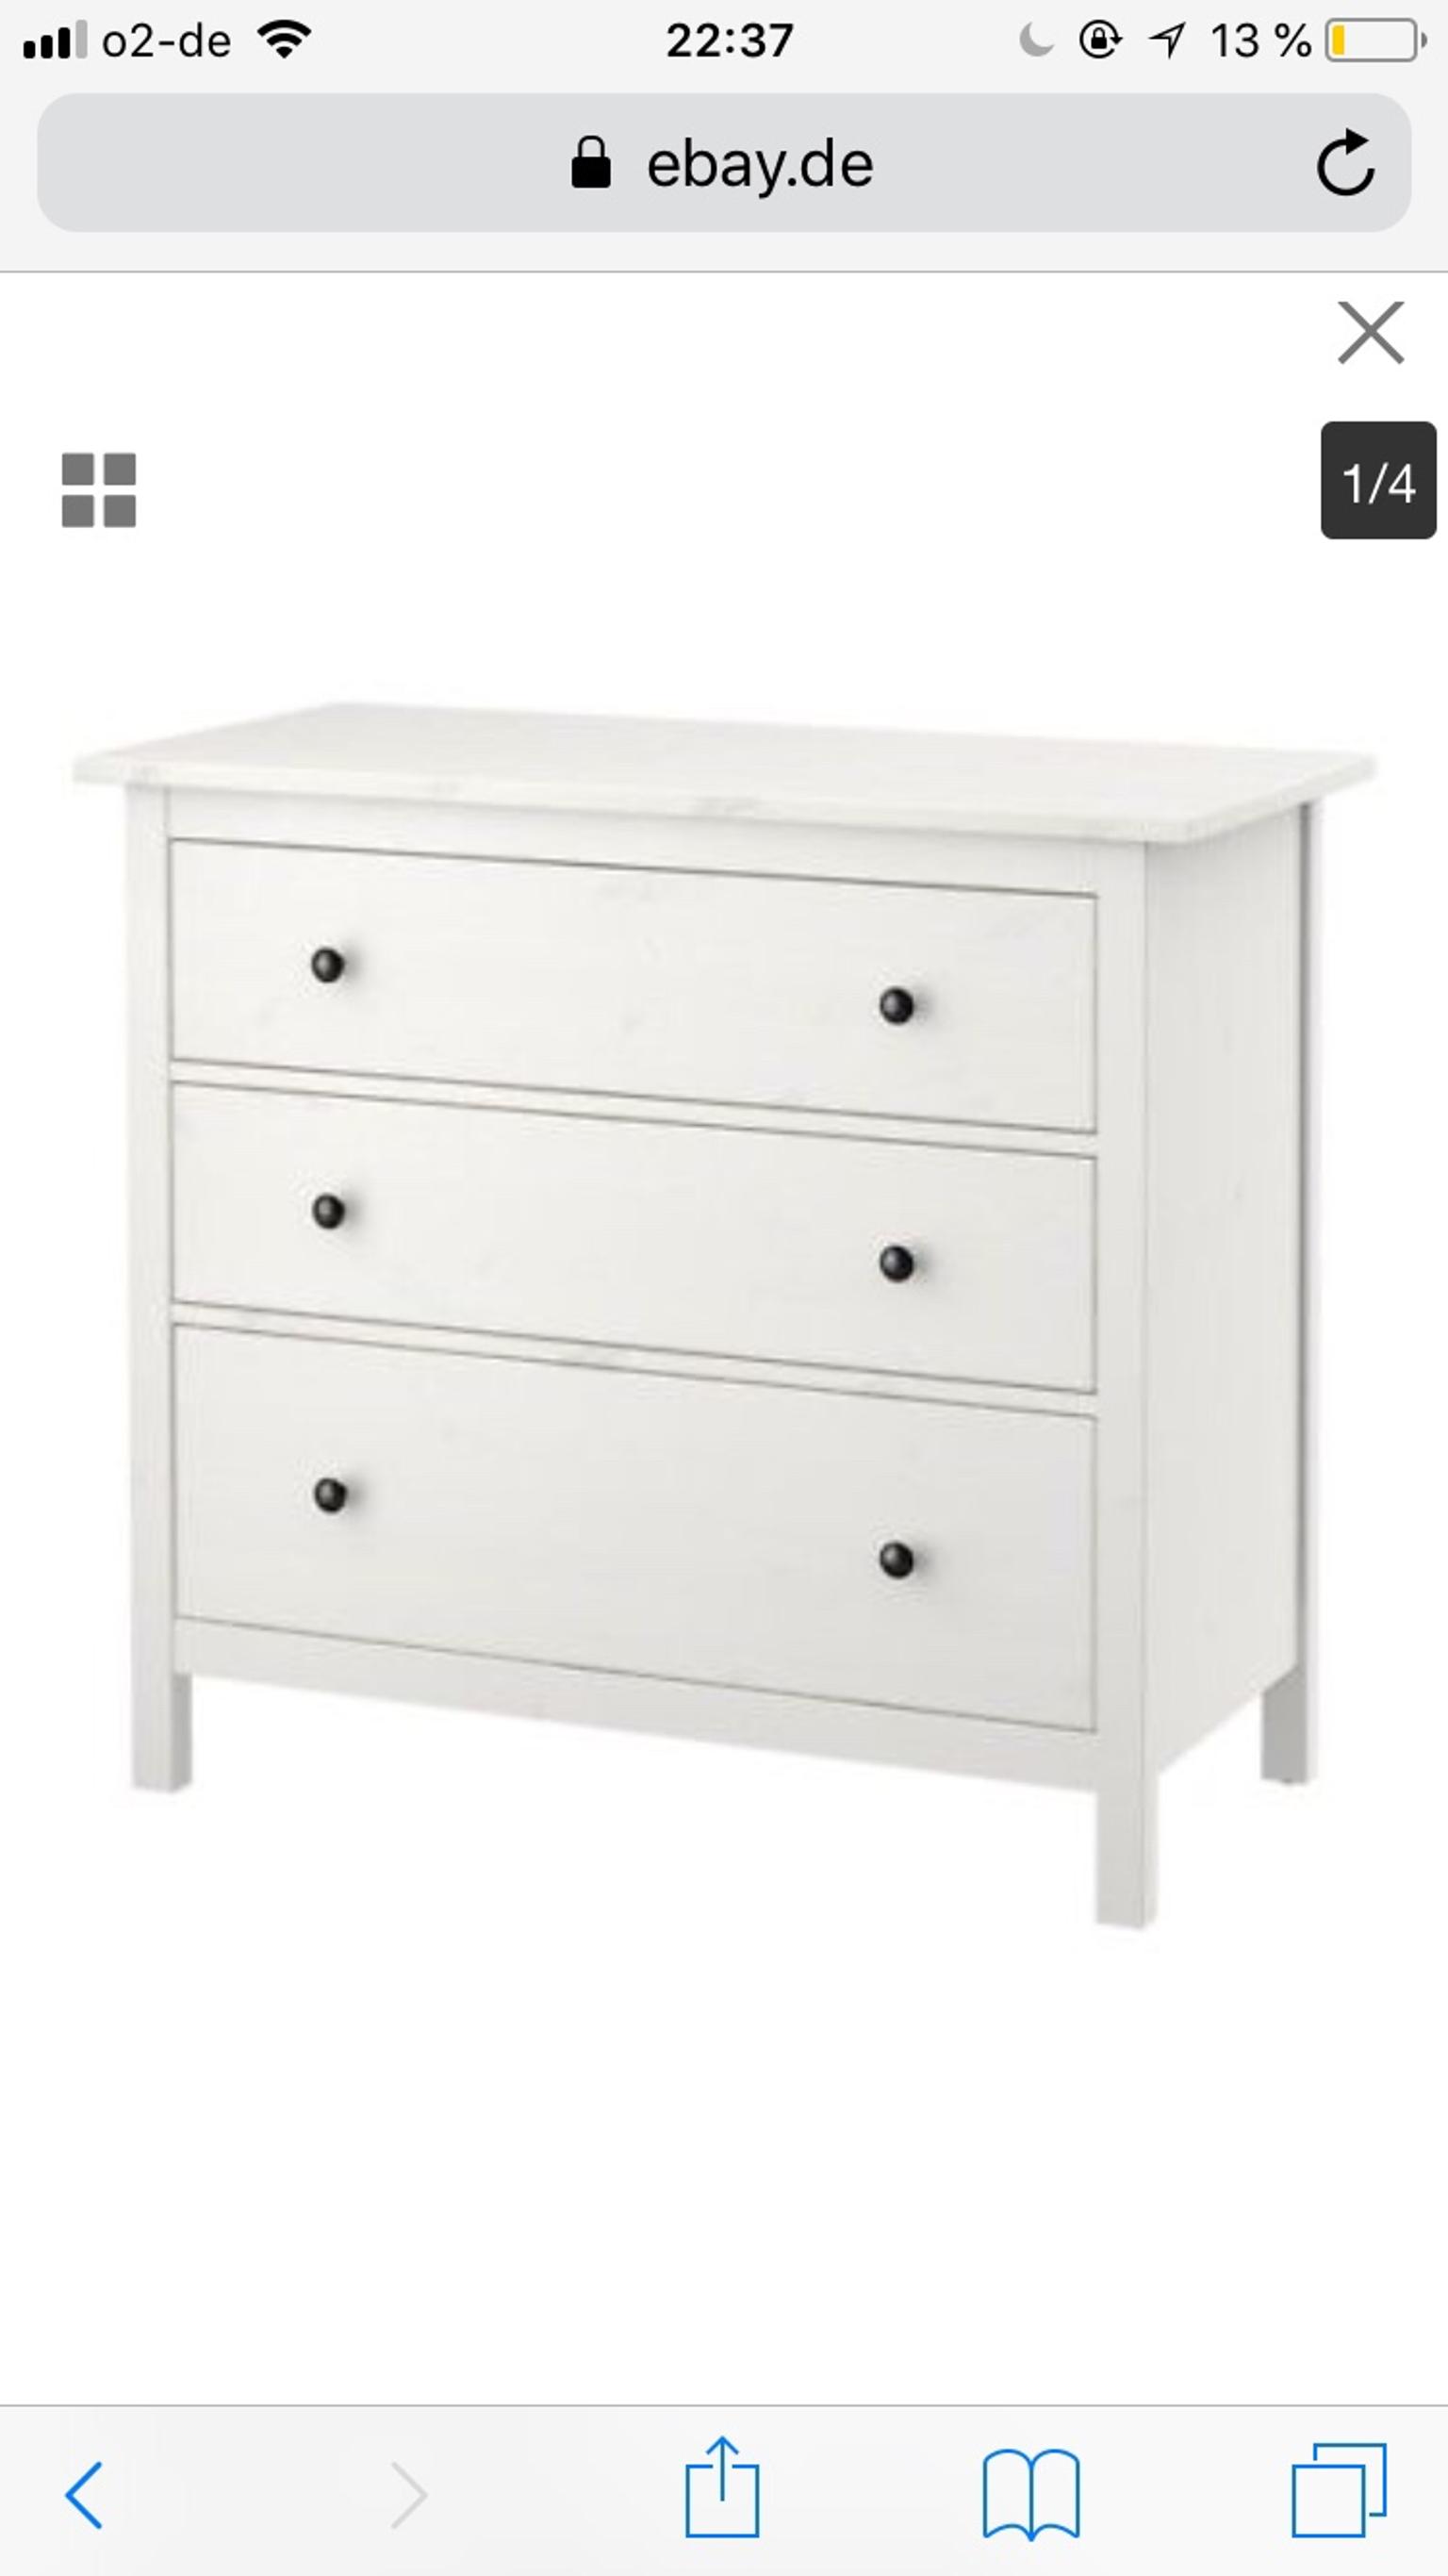 Ikea Hemnes Kommode Weis Gebeizt In 619 Mannheim For 70 00 For Sale Shpock